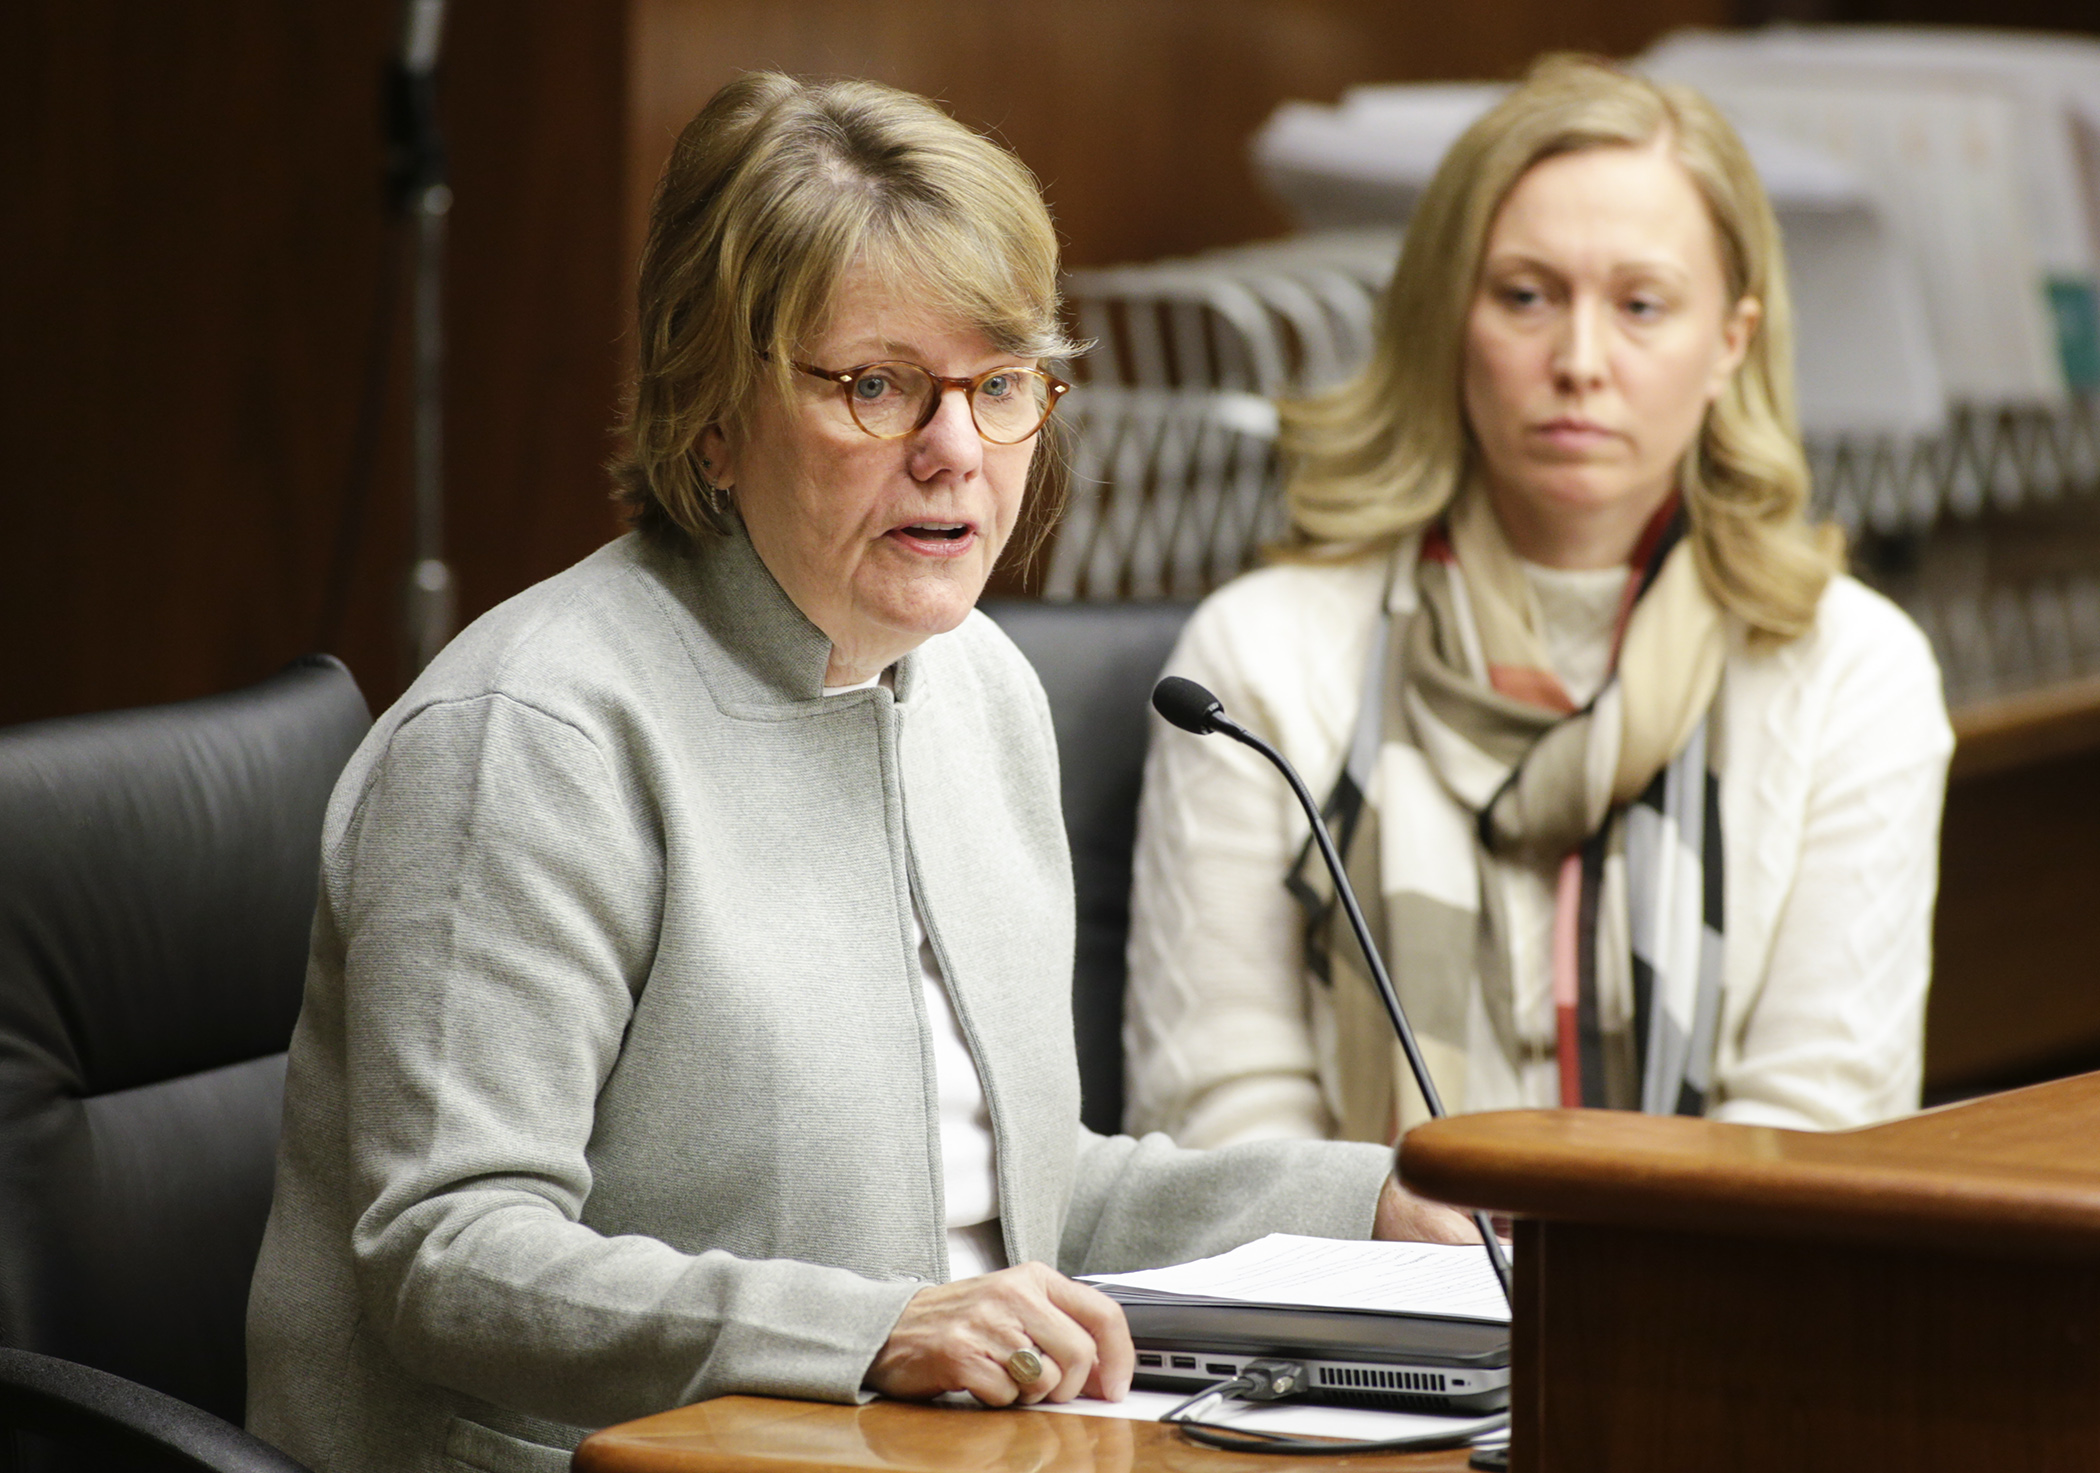 Colleen Moriarty, executive director of Hunger Solutions, testifies before the House Education Finance Division for HF1037, sponsored by Rep. Heather Edelson, right, to, in part, modify the calculation for school breakfast aid. Photo by Paul Battaglia